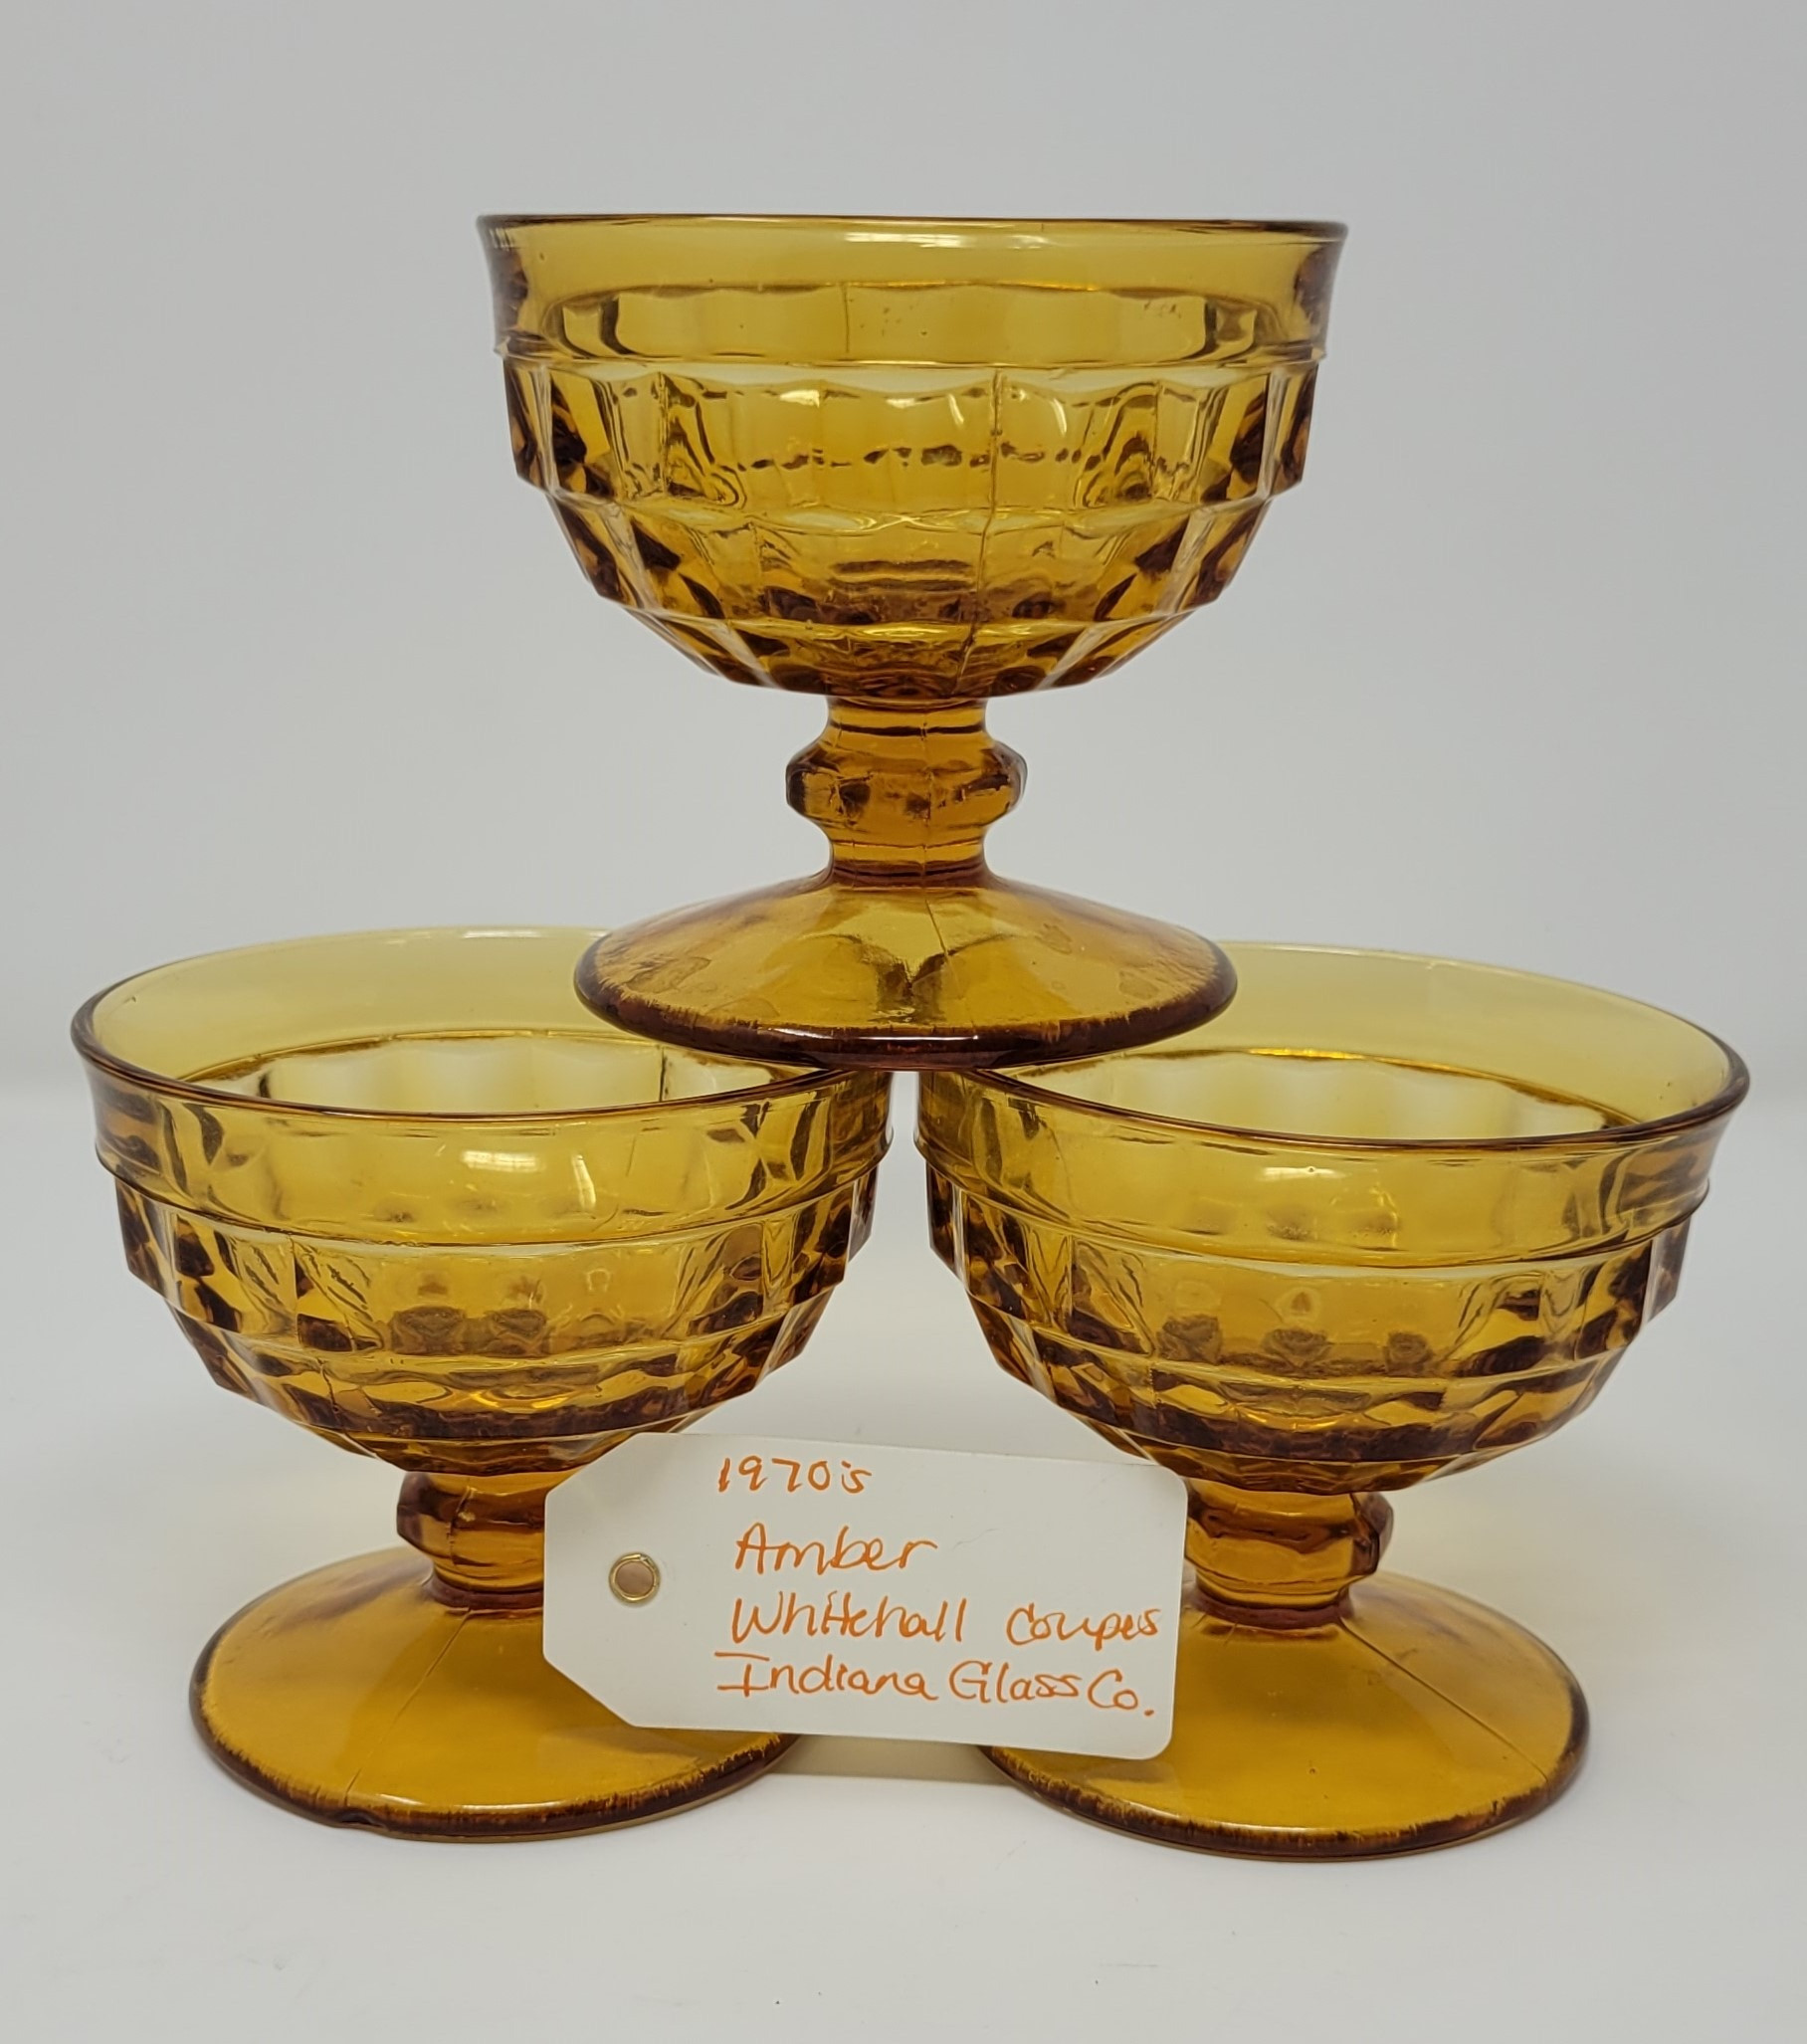 1970's Amber Whitehall Cups- Indiana Glass Co.